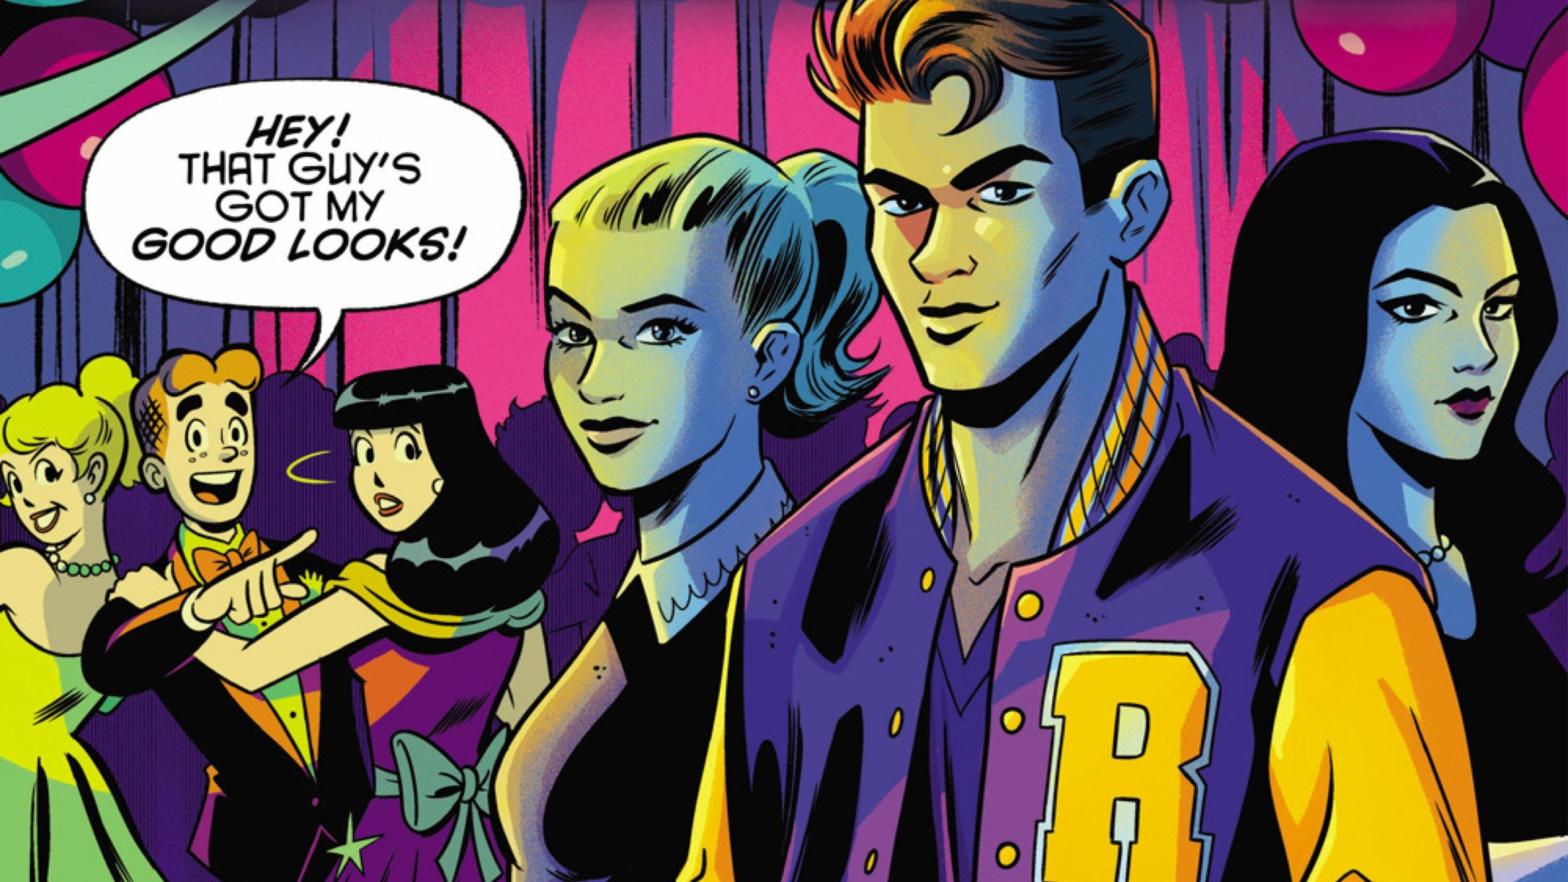 Inset of Archie Meets Riverdale #1 cover by Derek Charm. (Image: Archie Comics/The CW)